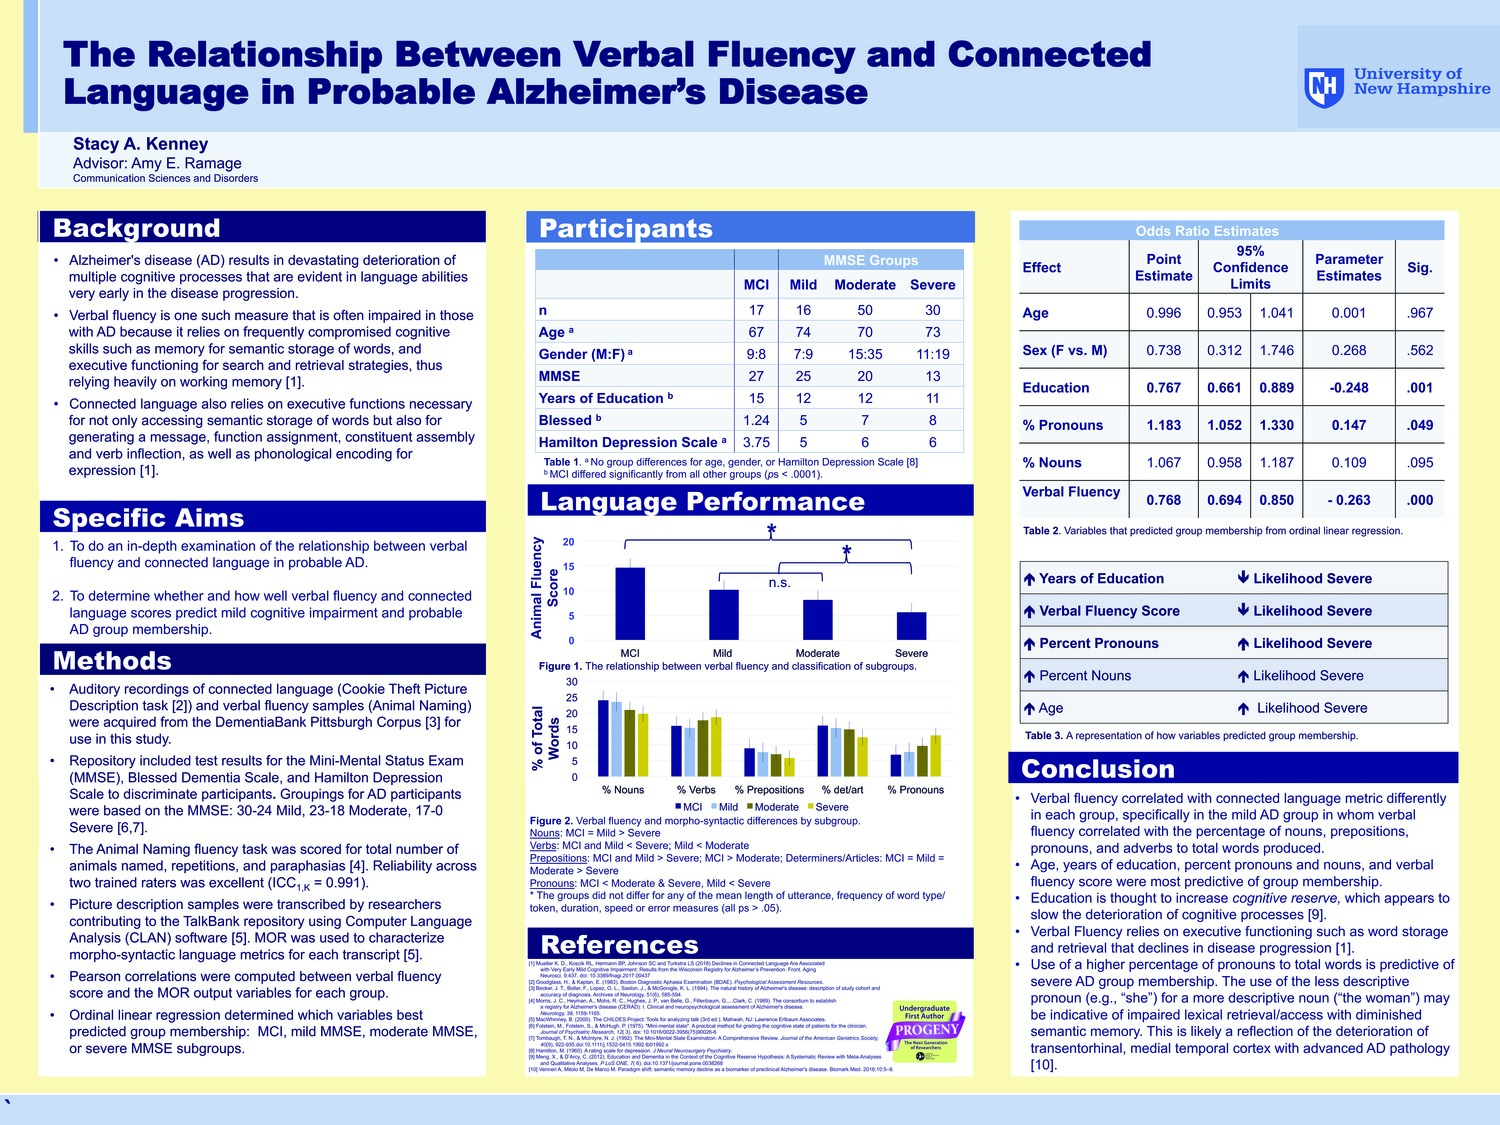 The Relationship Between Verbal Fluency And Connected Language In Probable Alzheimer’S Disease by sak1005